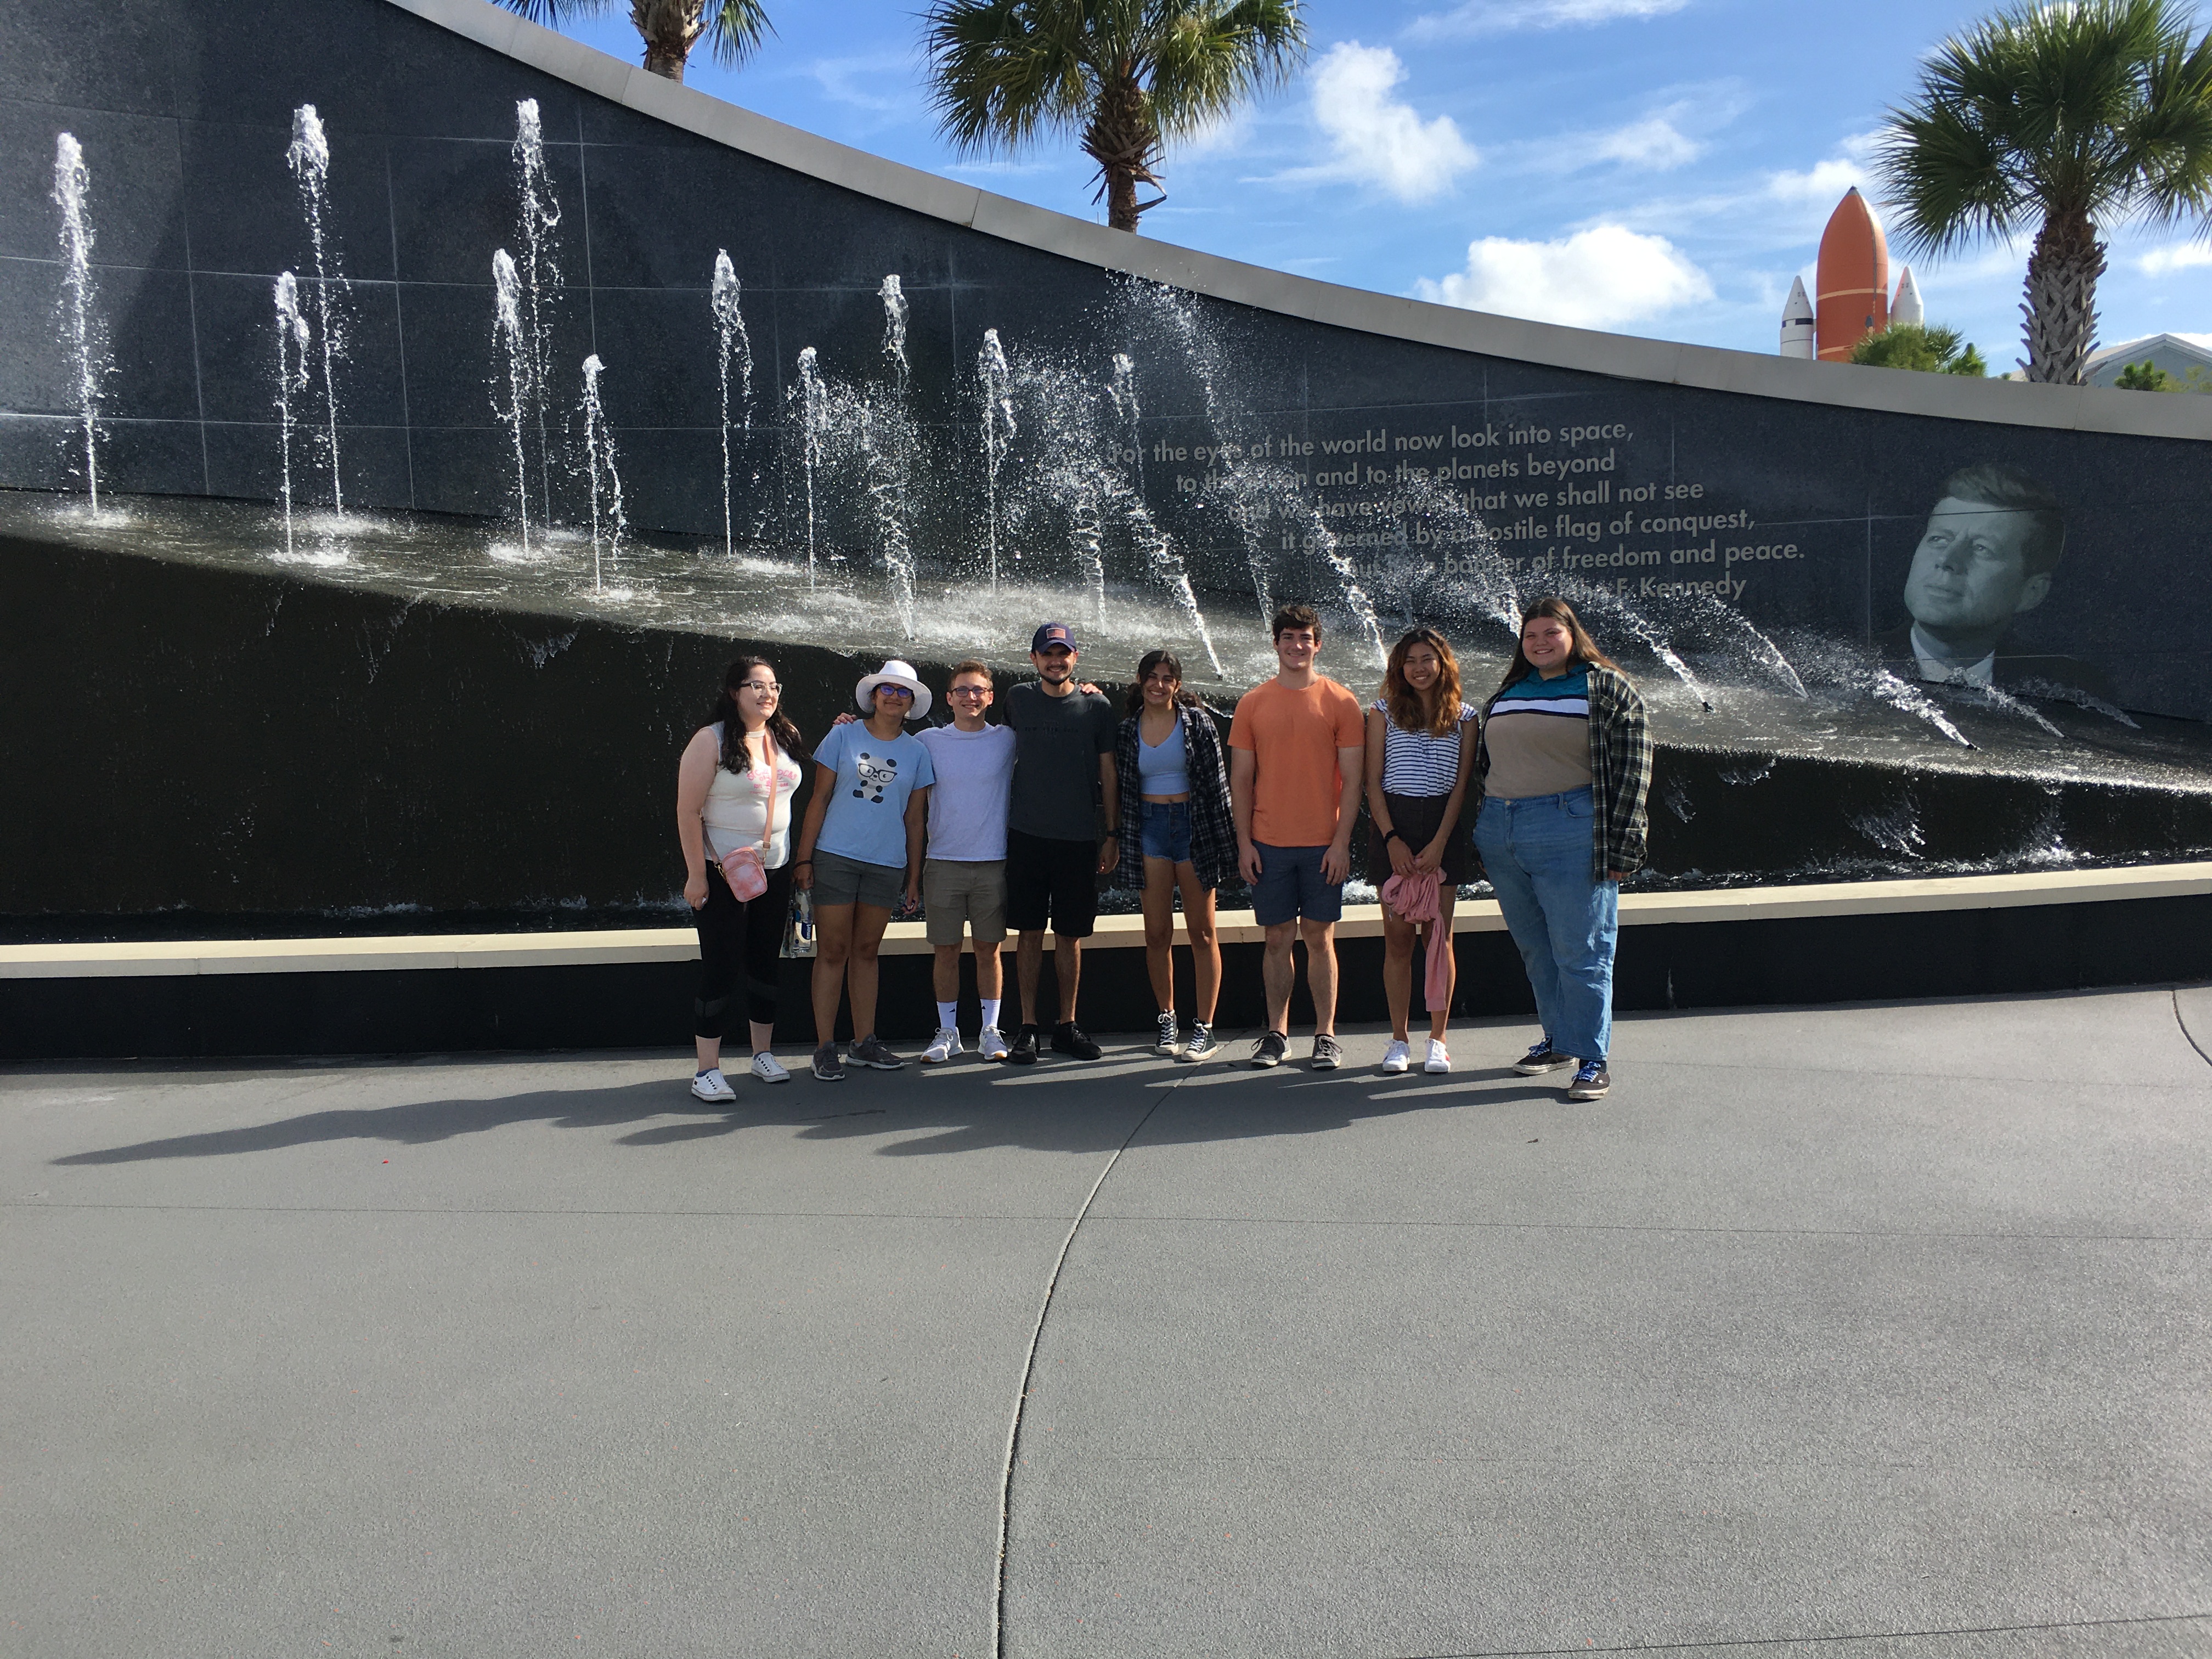 Students in front of JFK fountain at Kennedy Space Center